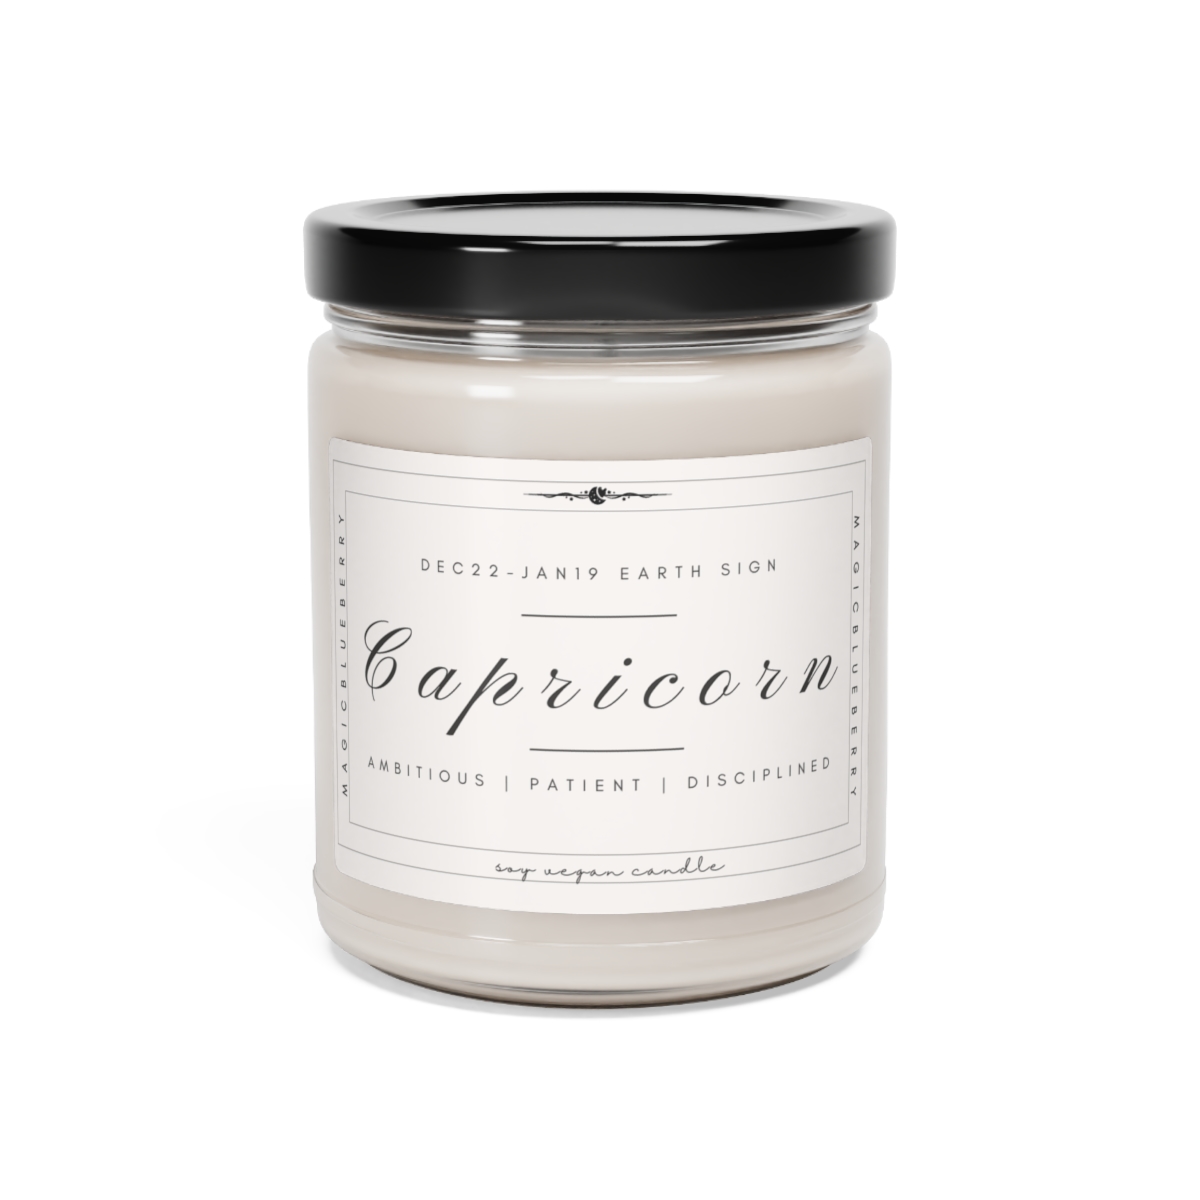 Capricorn - Scented Vegan Soy Wax Candle Clear Jar Candle, Spell Candle, Sassy Candle Vegan Candle Cotton Wick Candle Home Deco product thumbnail image